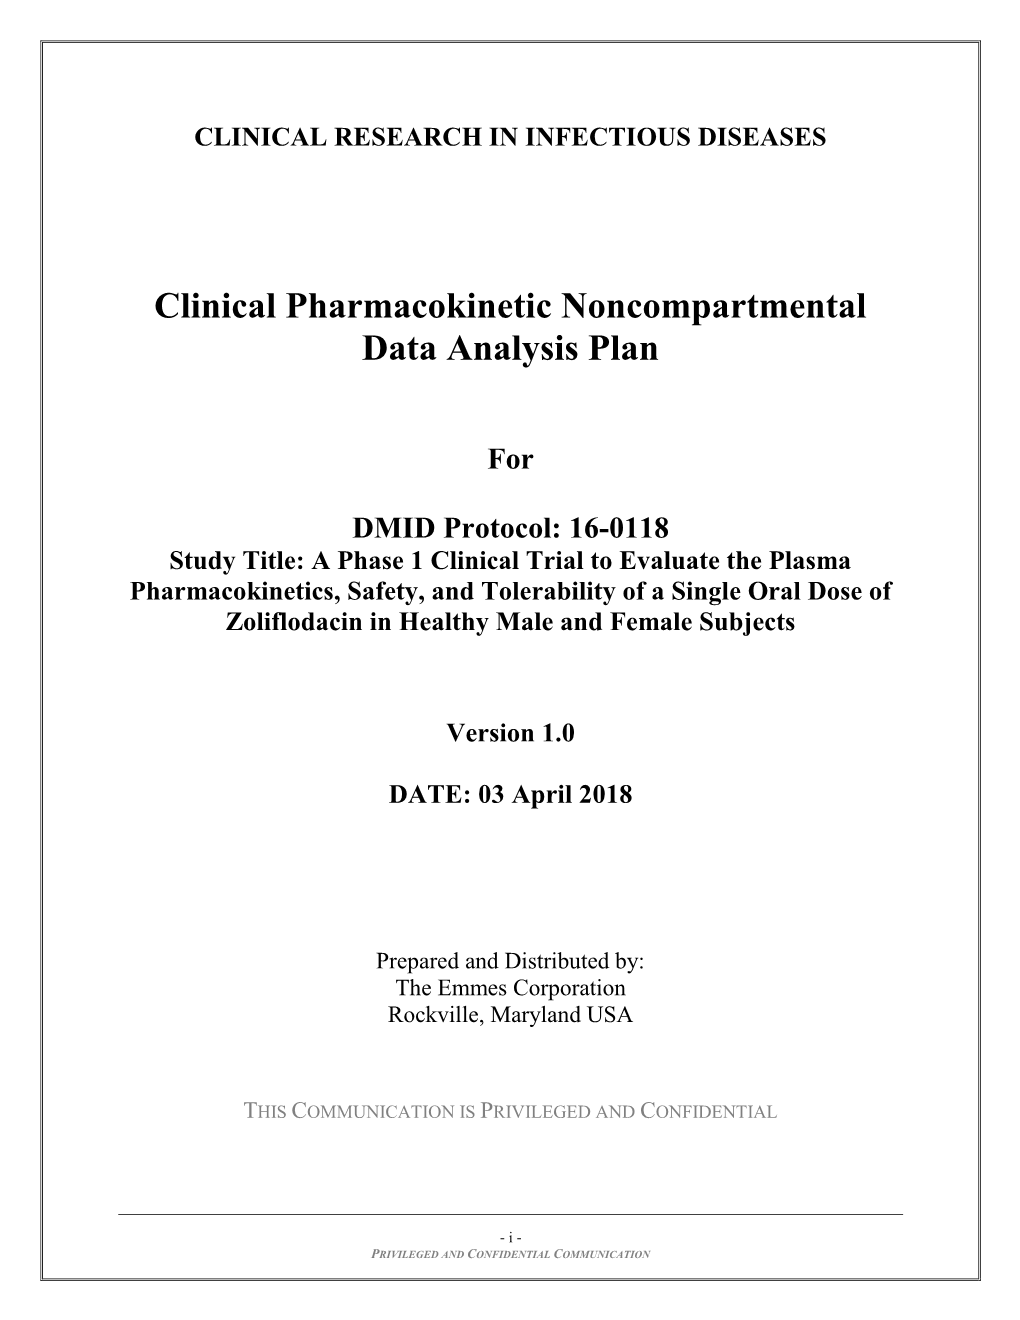 Clinical Pharmacokinetic Noncompartmental Data Analysis Plan